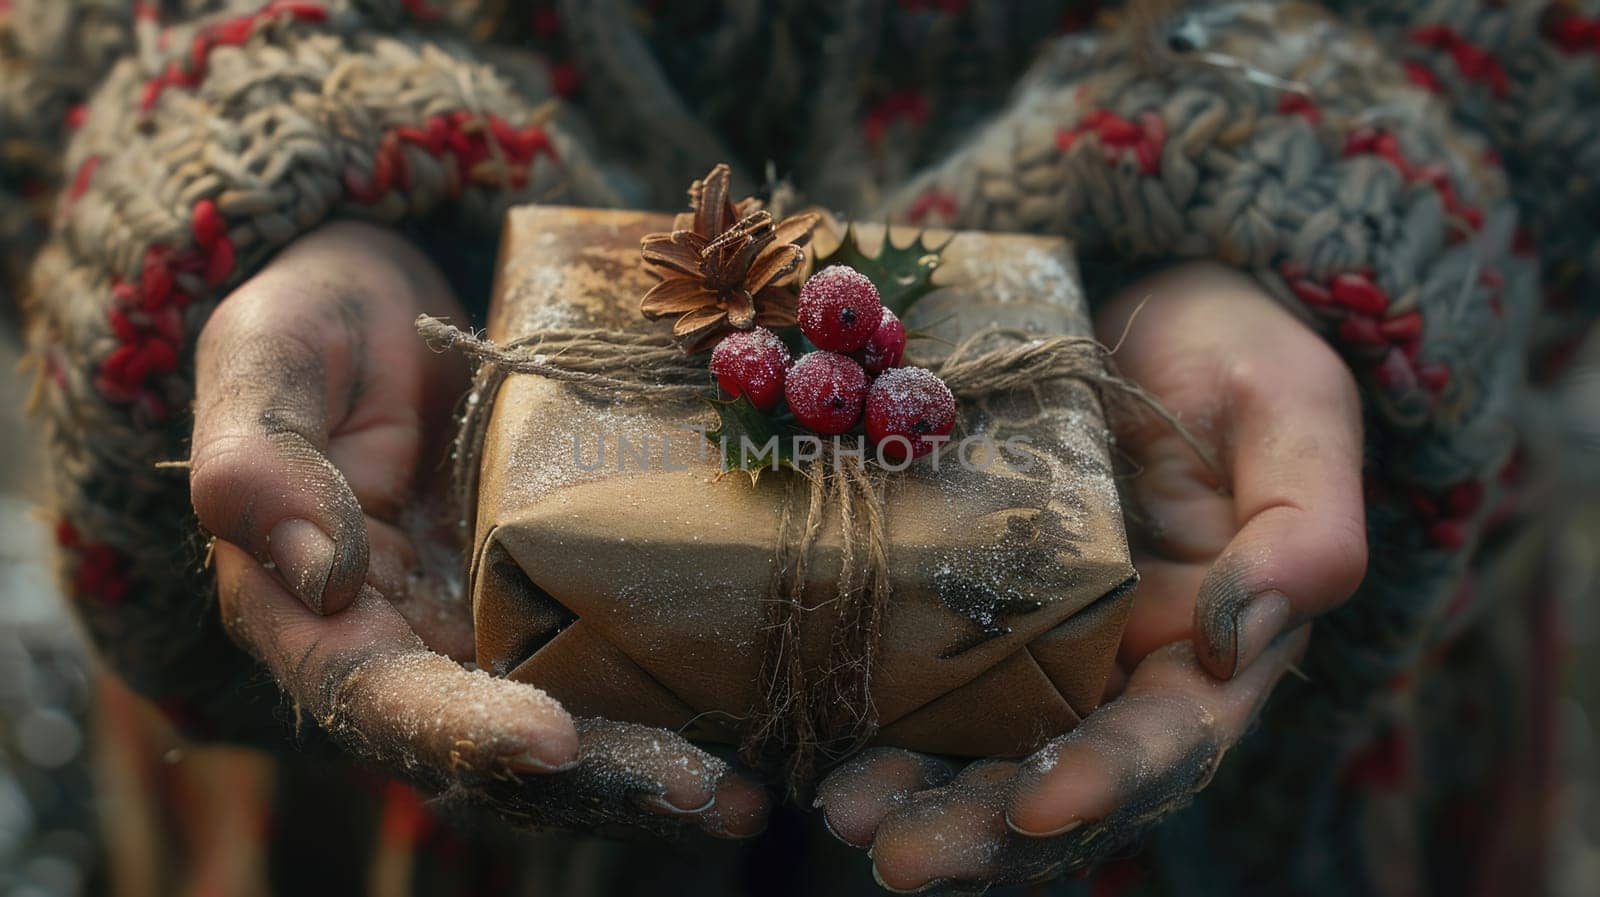 A person holding a gift-wrapped present in their hands, preparing to give it to someone.